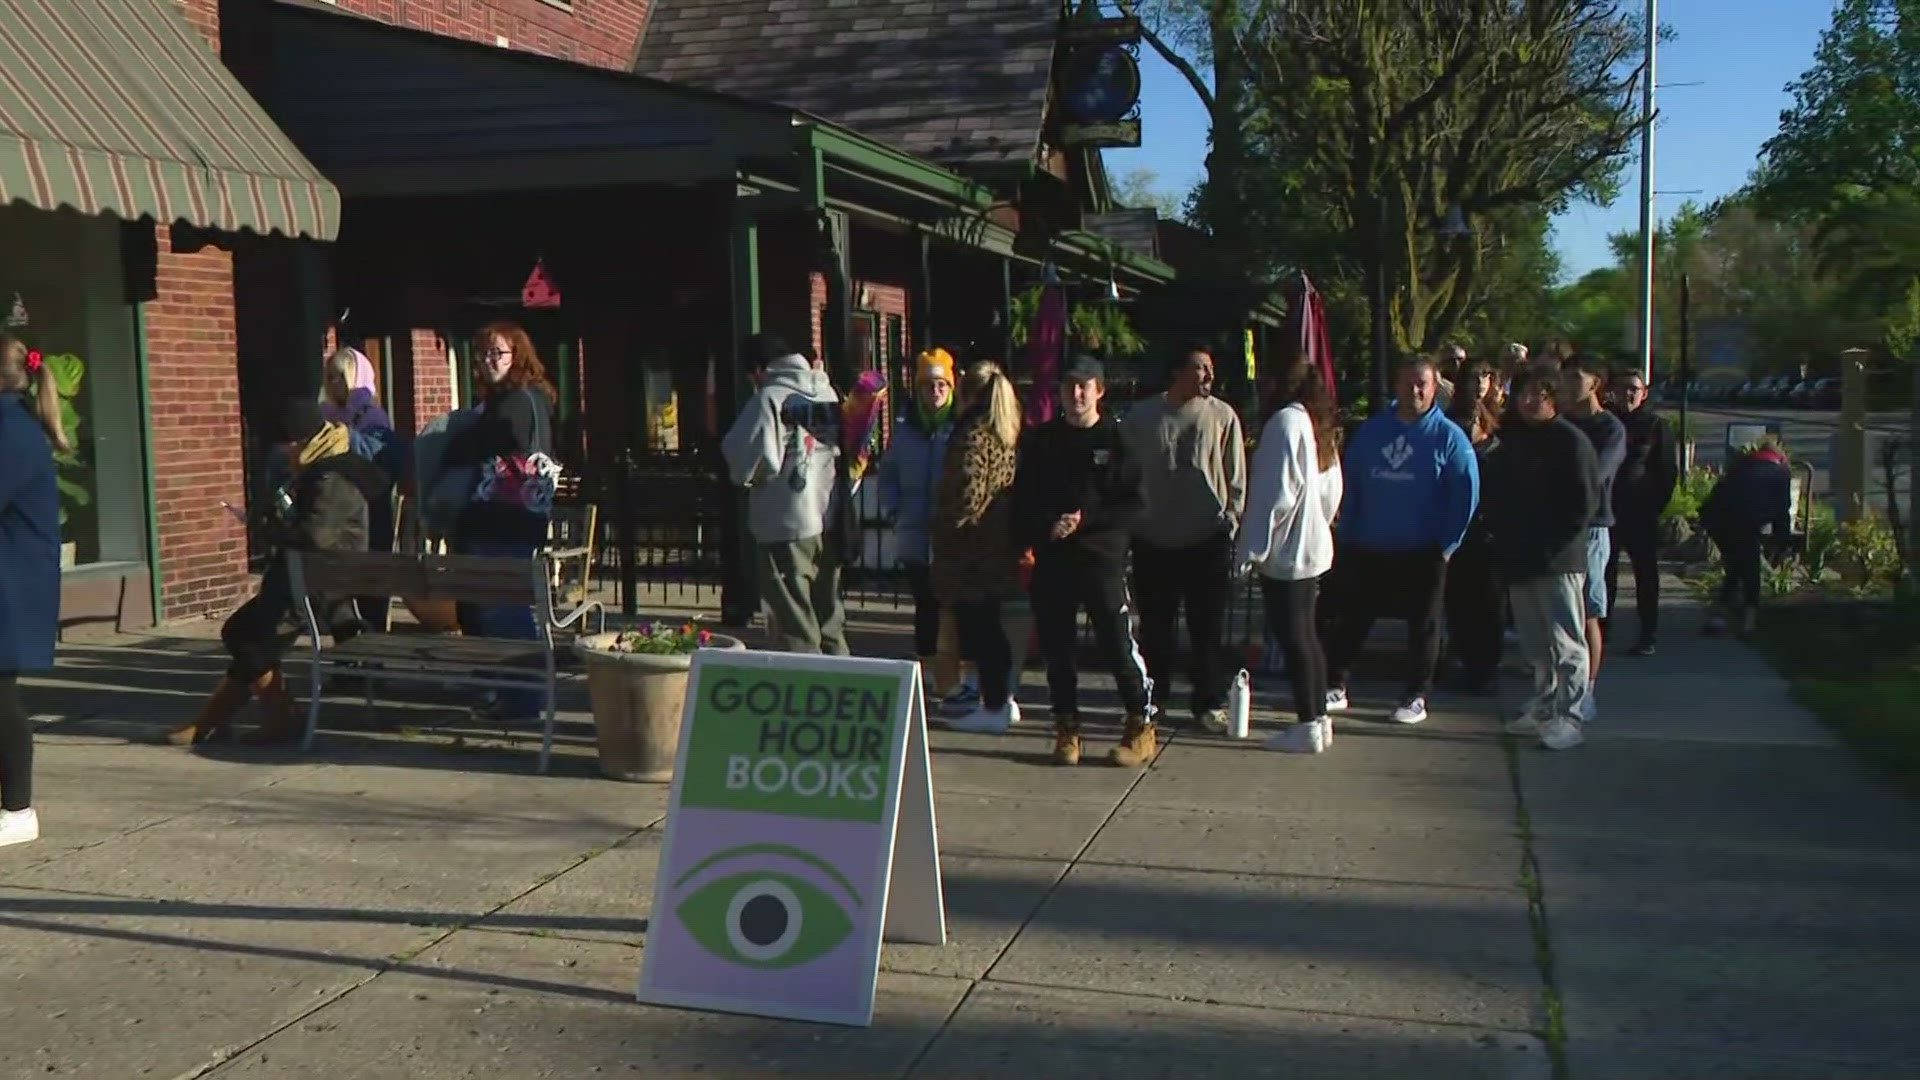 13Sunrise's Anna Chalker went to the Luna record store around 8 a.m. when the line was wrapped around the building.